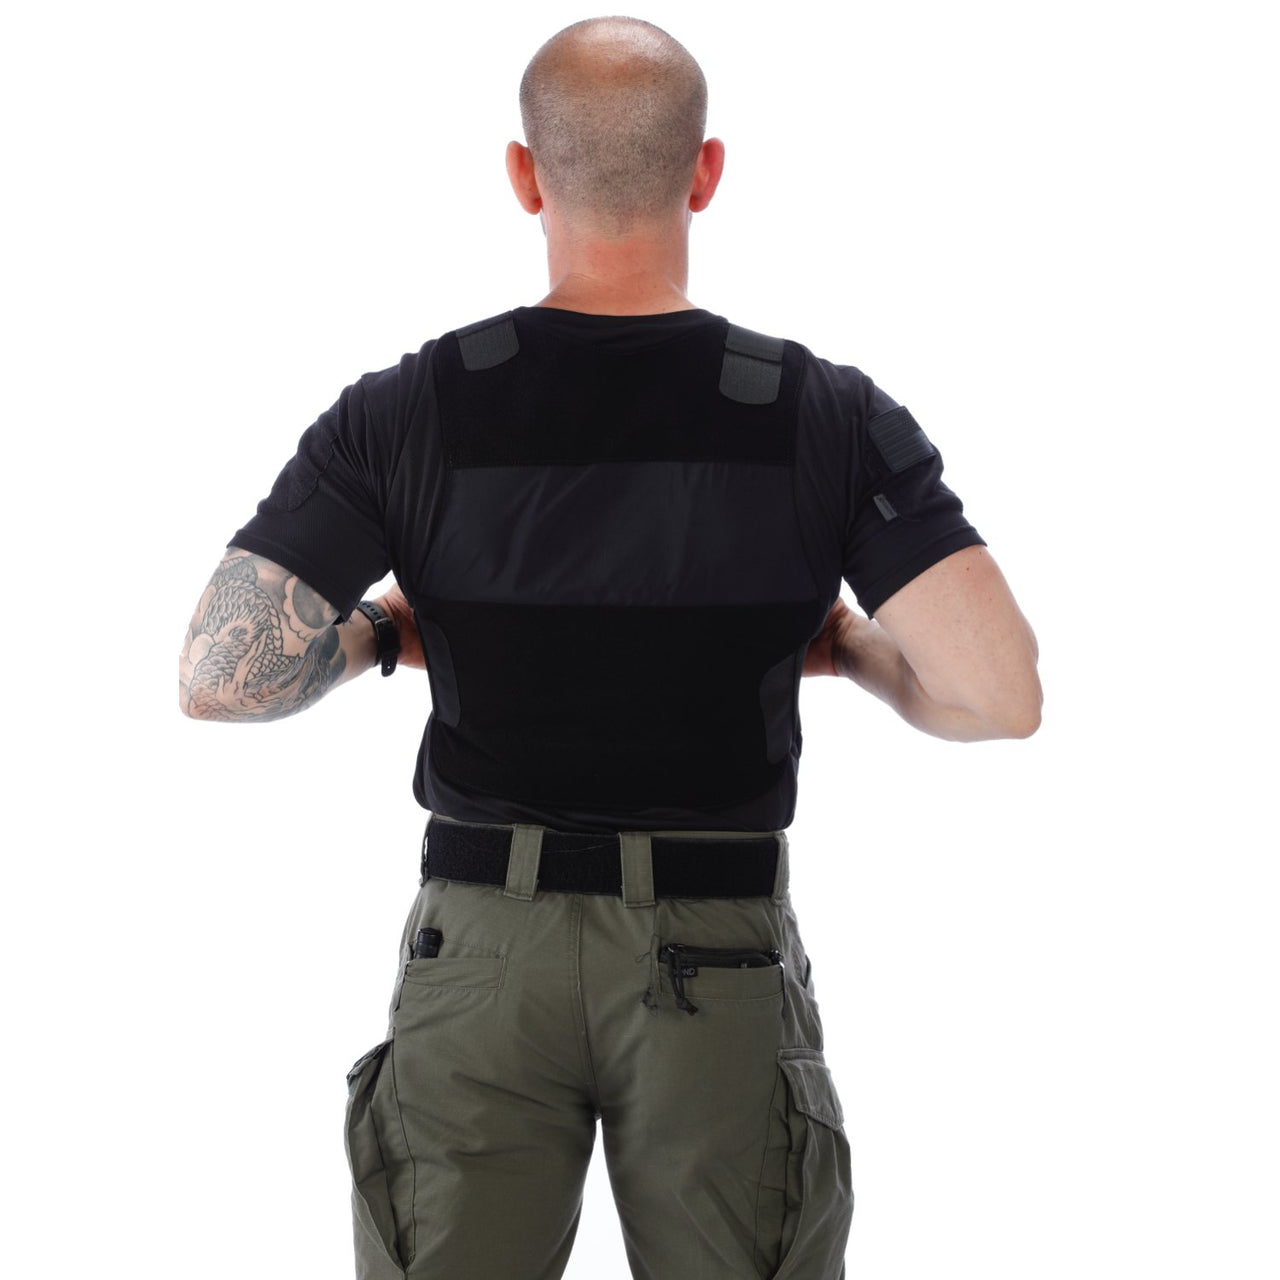 The back view of a man wearing a Body Armor Direct All American Concealable Enhanced Multi-Threat Vest.